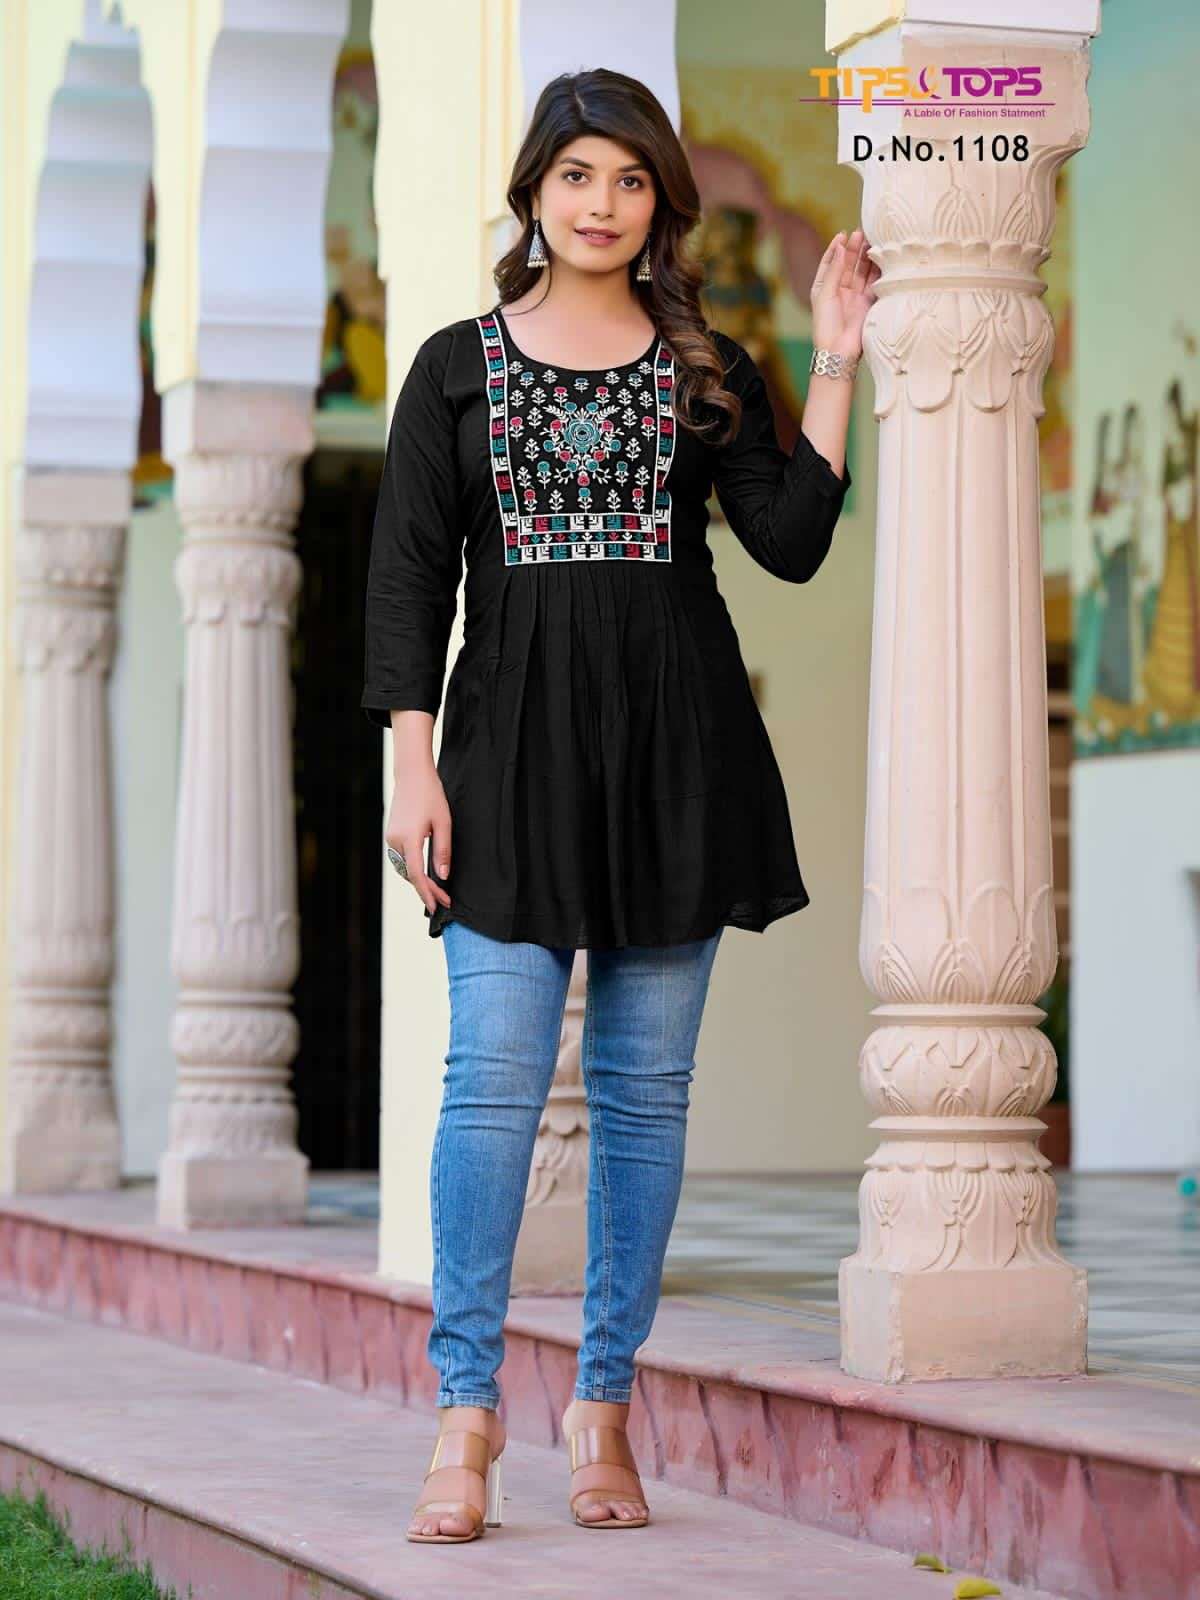 tips and tops bubbly vol-11 fancy designer western short tops latest catalogue surat